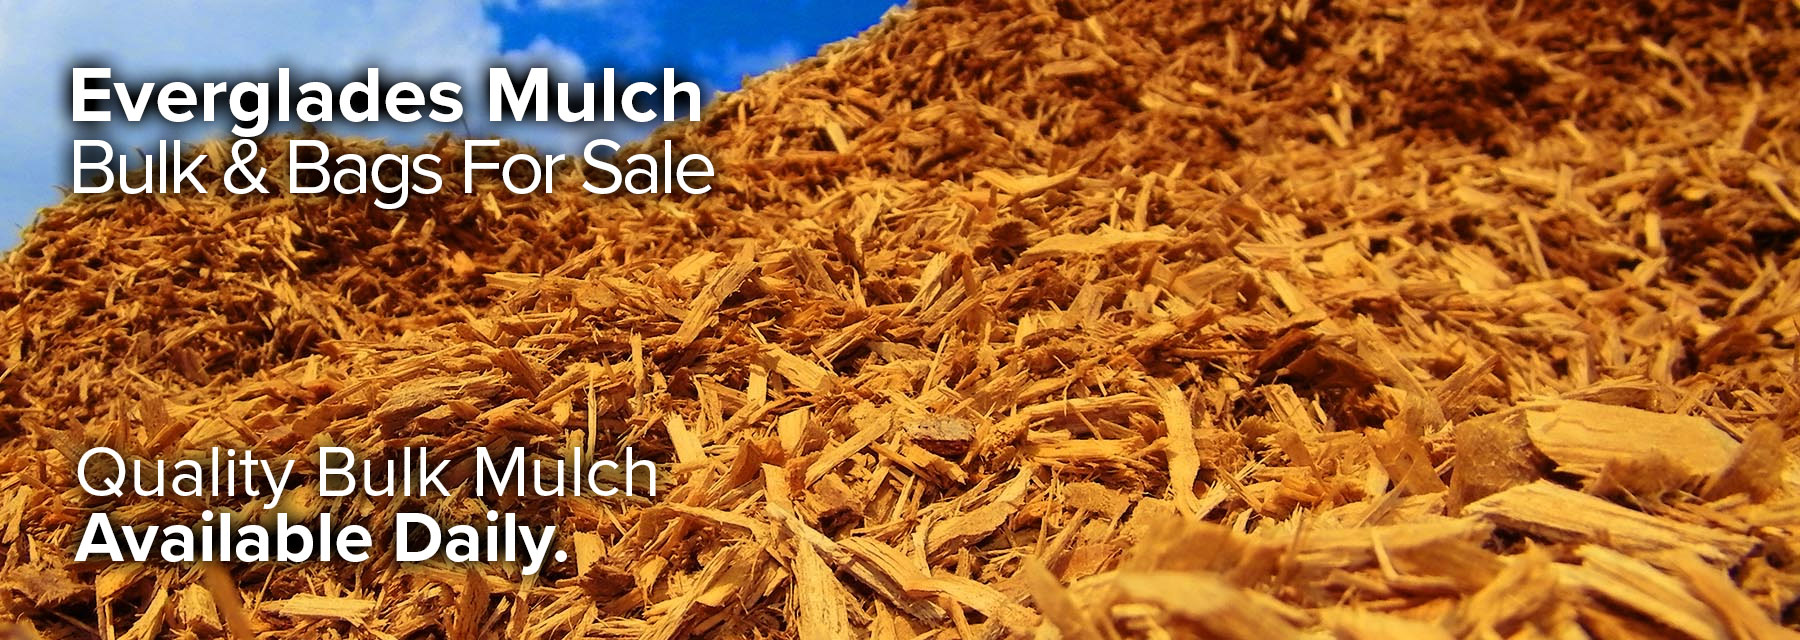 Mulch For Sale Near Me | Buy Mulch Online | Delivery & Pickup